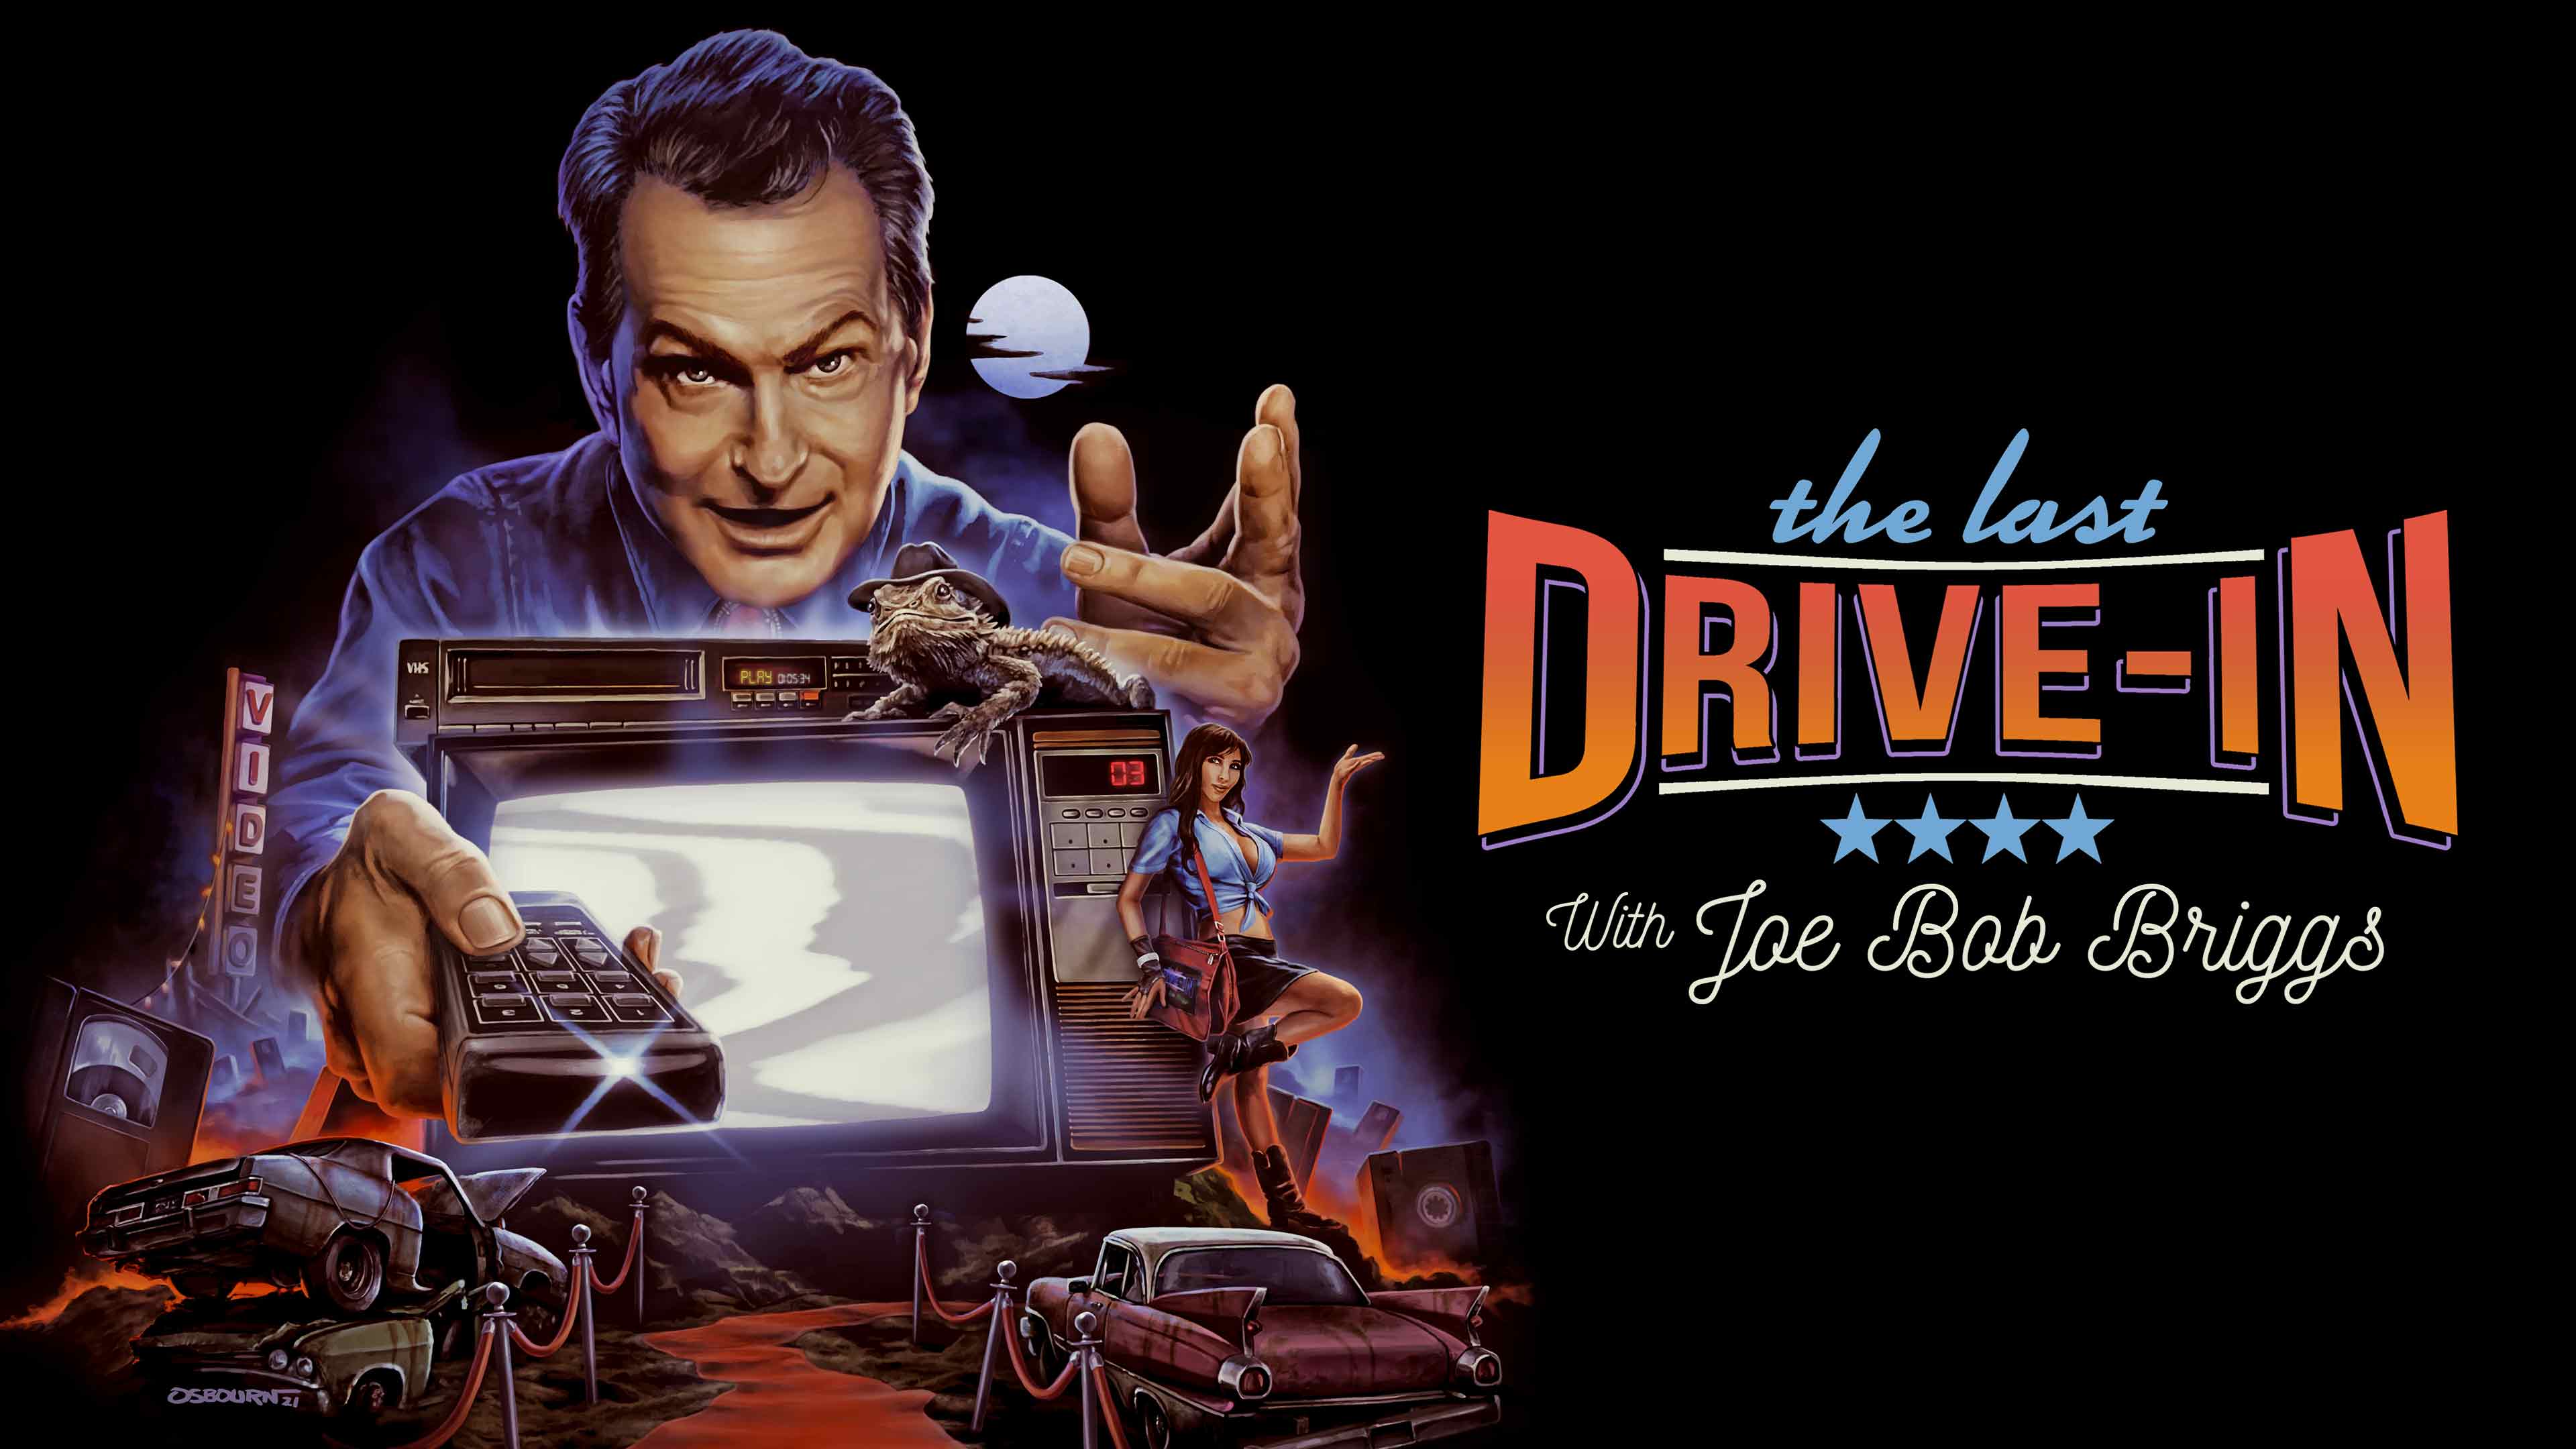 Watch The Last Drive-In with Joe Bob Briggs Trailer | The Last Drive-in With Joe Bob Briggs Video Extras